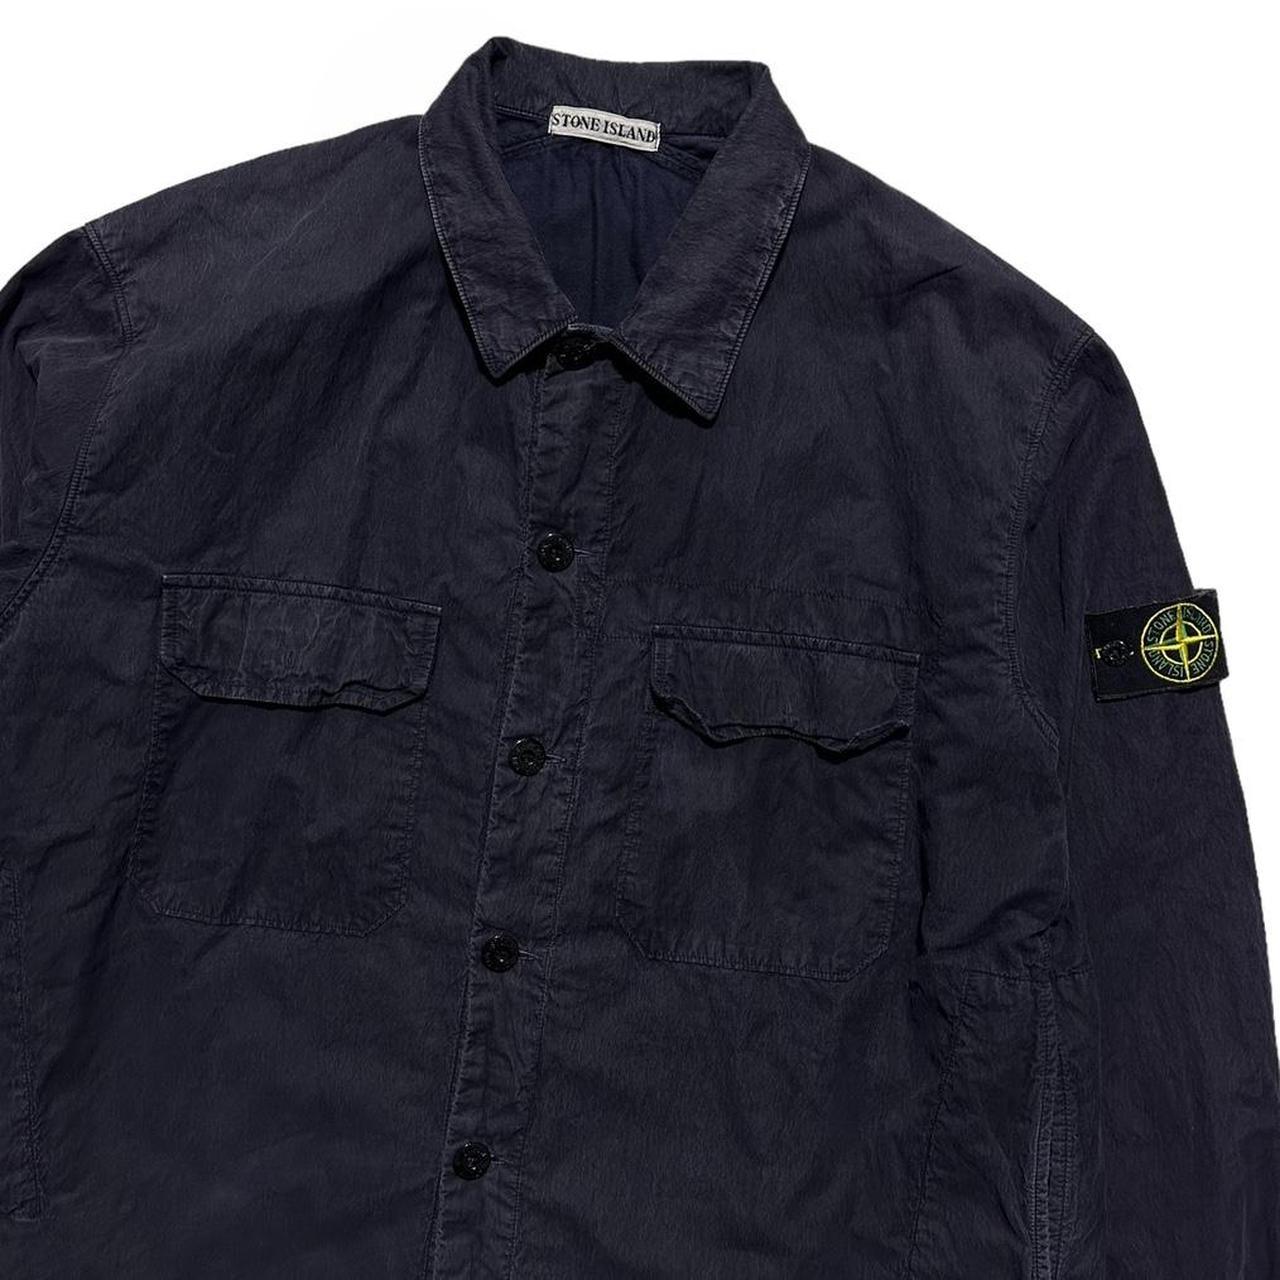 Stone Island Brushed Cotton Double Pocket Overshirt - Known Source